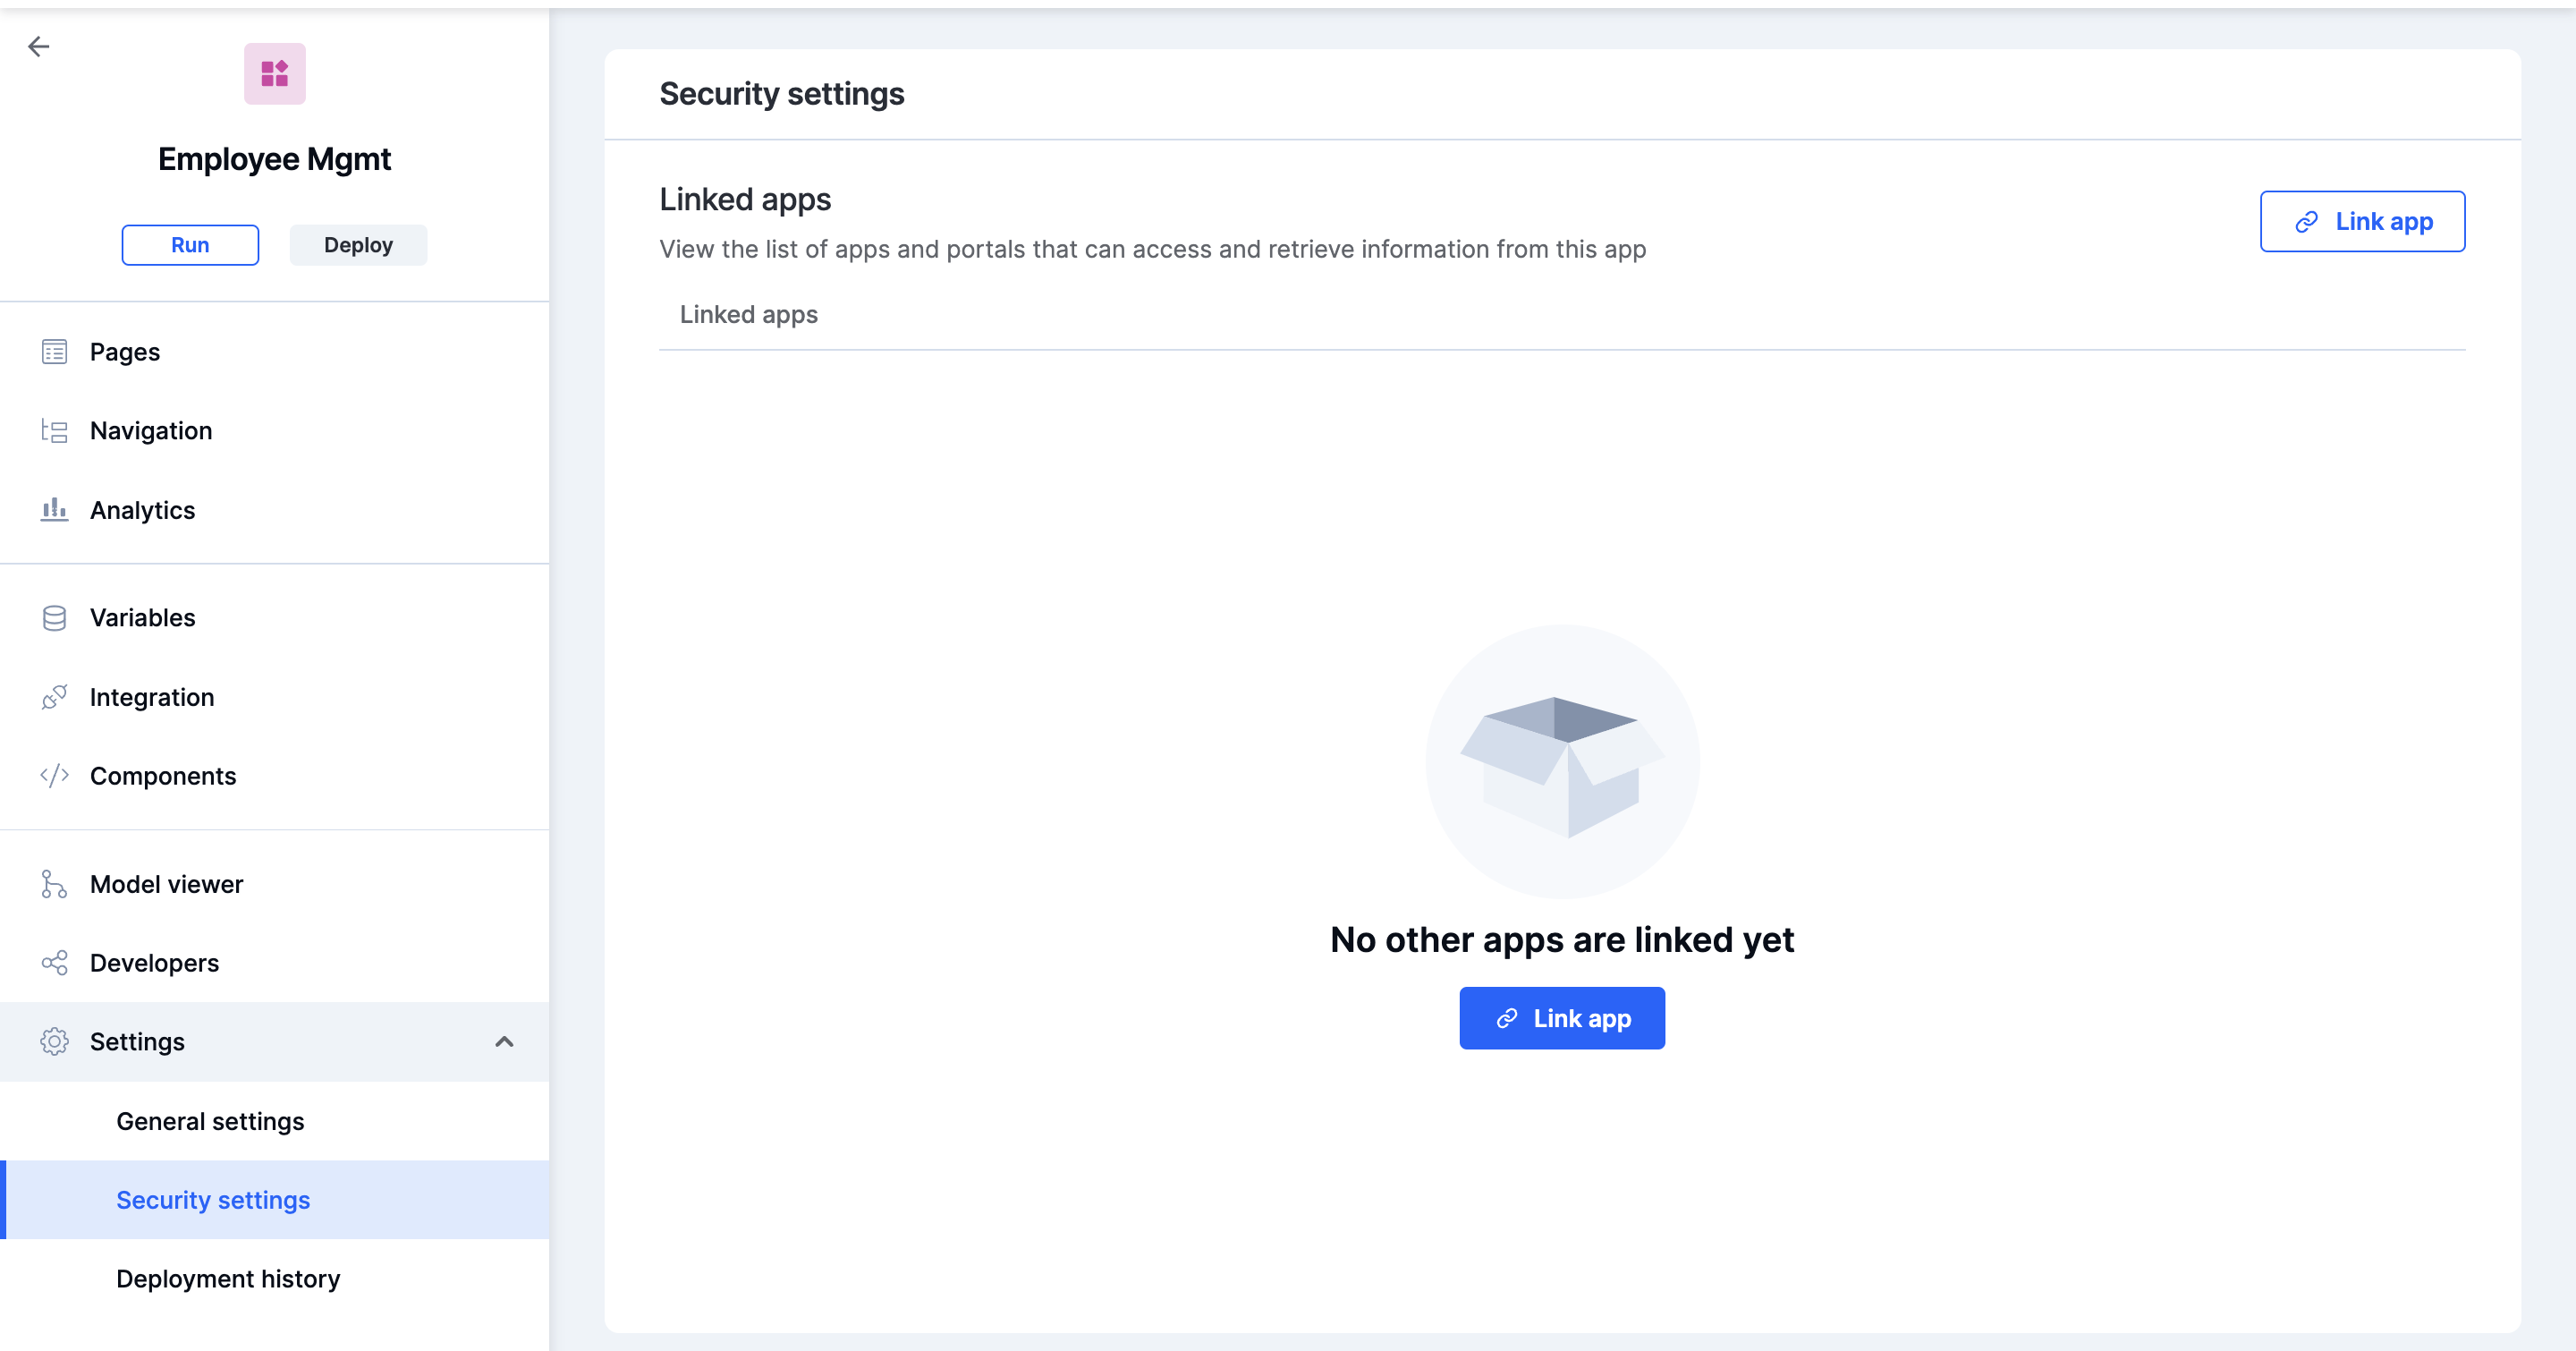 Security settings page where you can link other apps